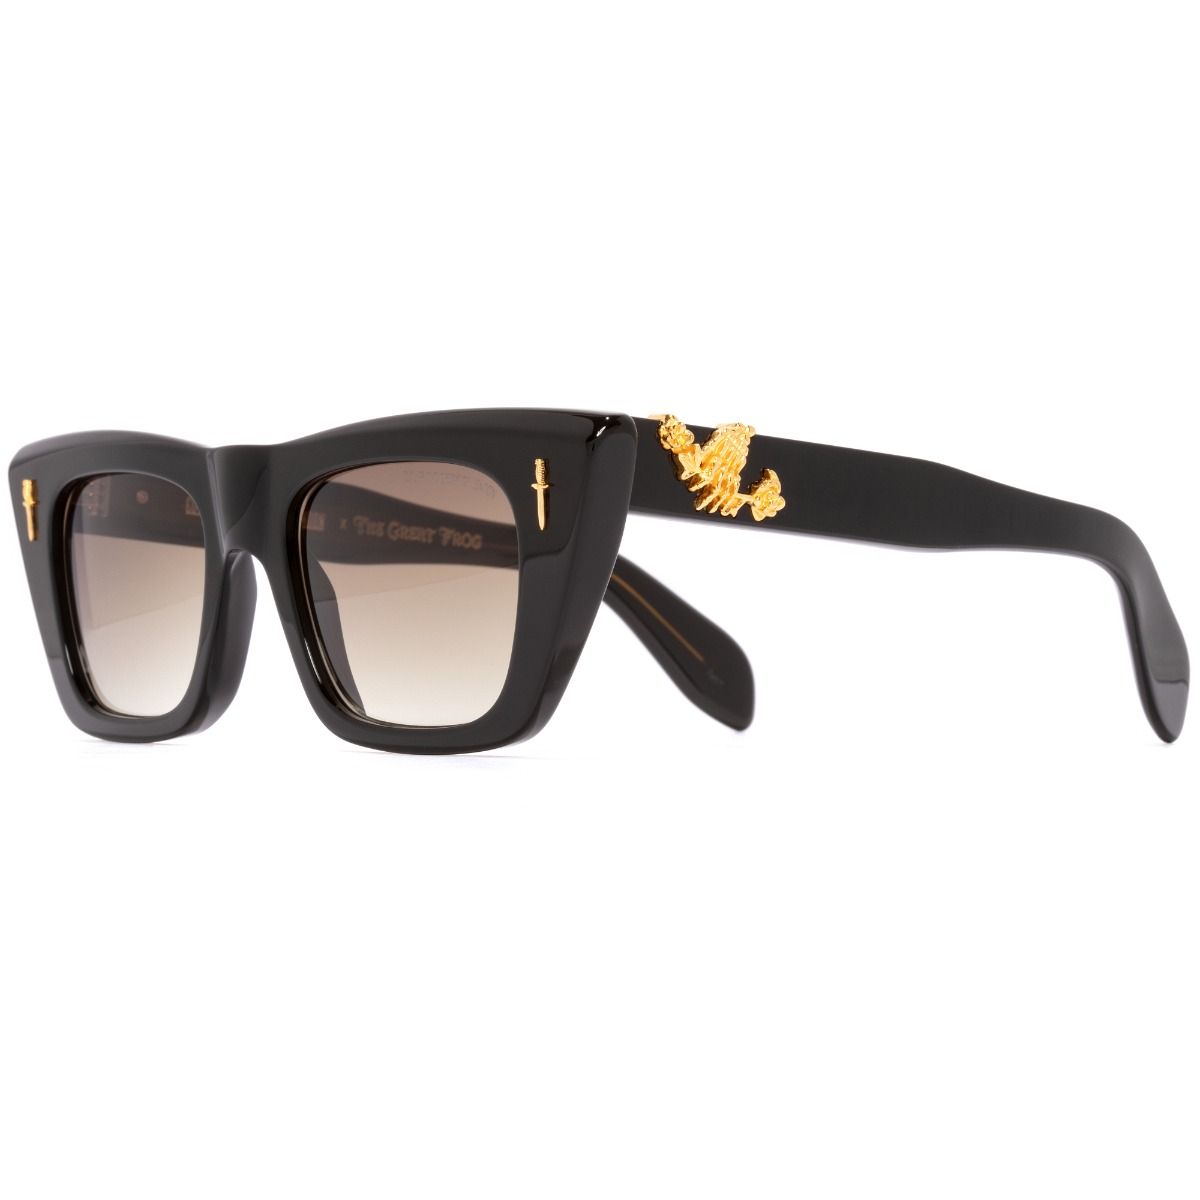 The Great Frog Love And Death Limited Edition Cat Eye Sunglasses-Black Gold